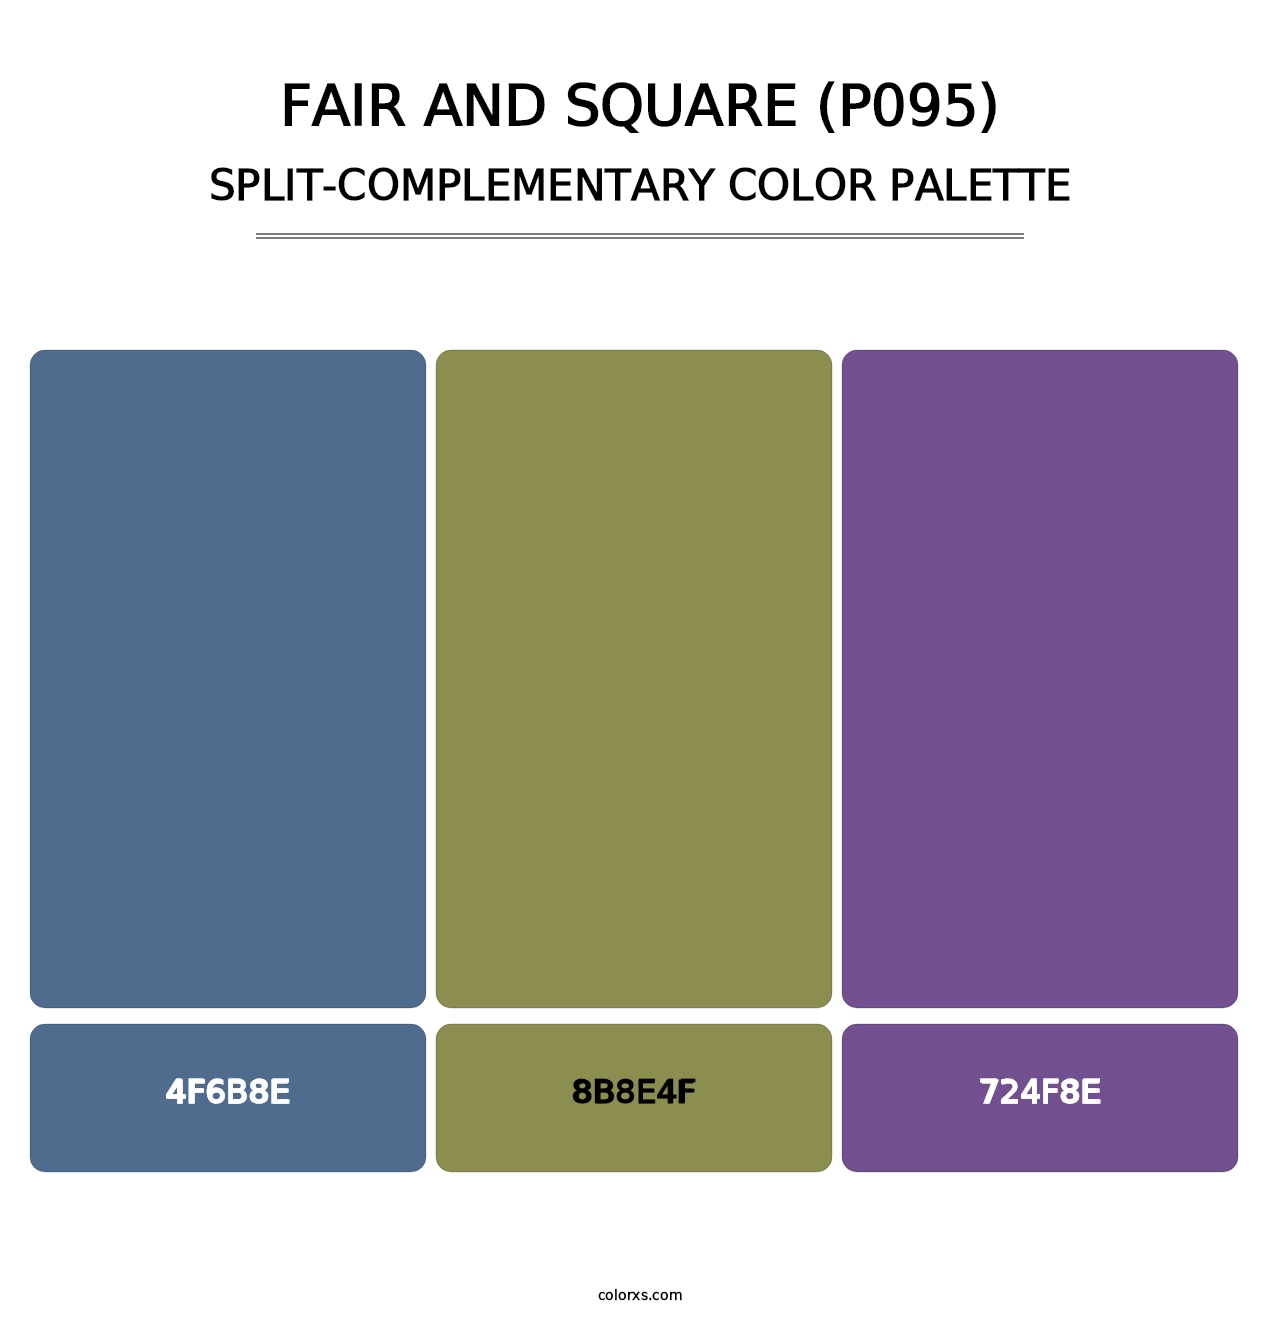 Fair and Square (P095) - Split-Complementary Color Palette